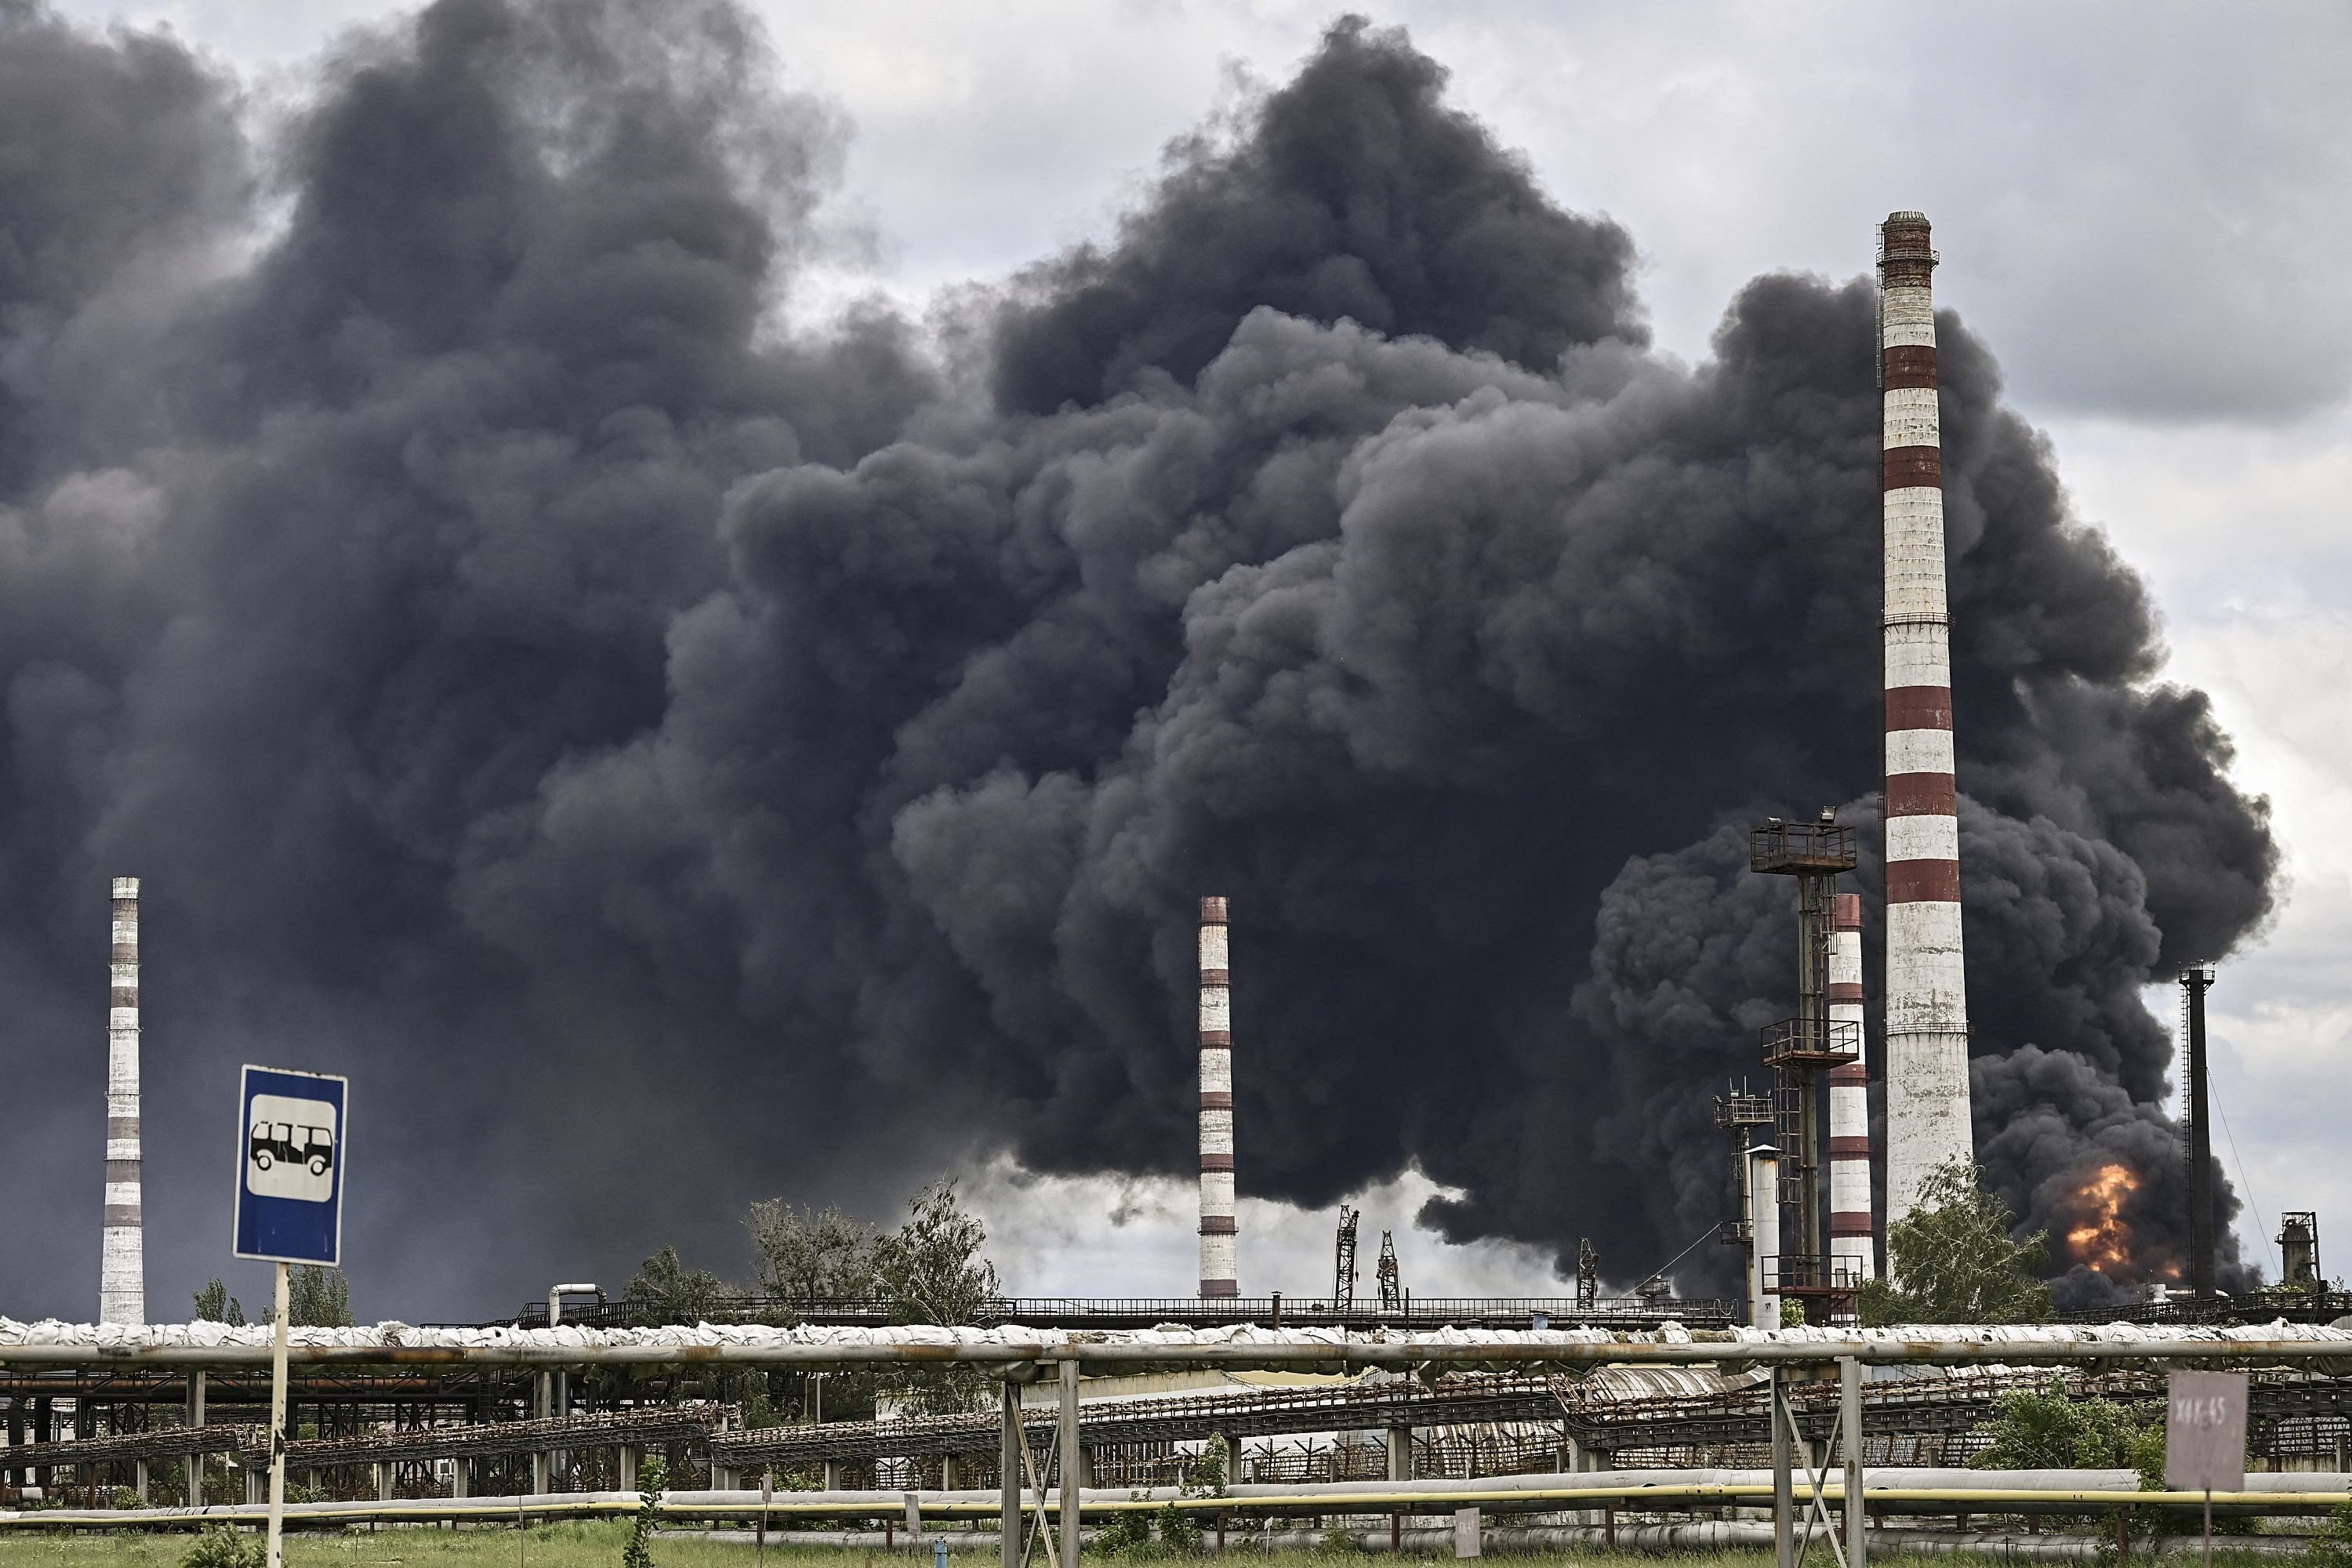 Smoke rises from an oil refinery after an attack outside the city of Lysychans in the eastern Donbass region, Ukraine, May 22, 2022. (AFP Photo)